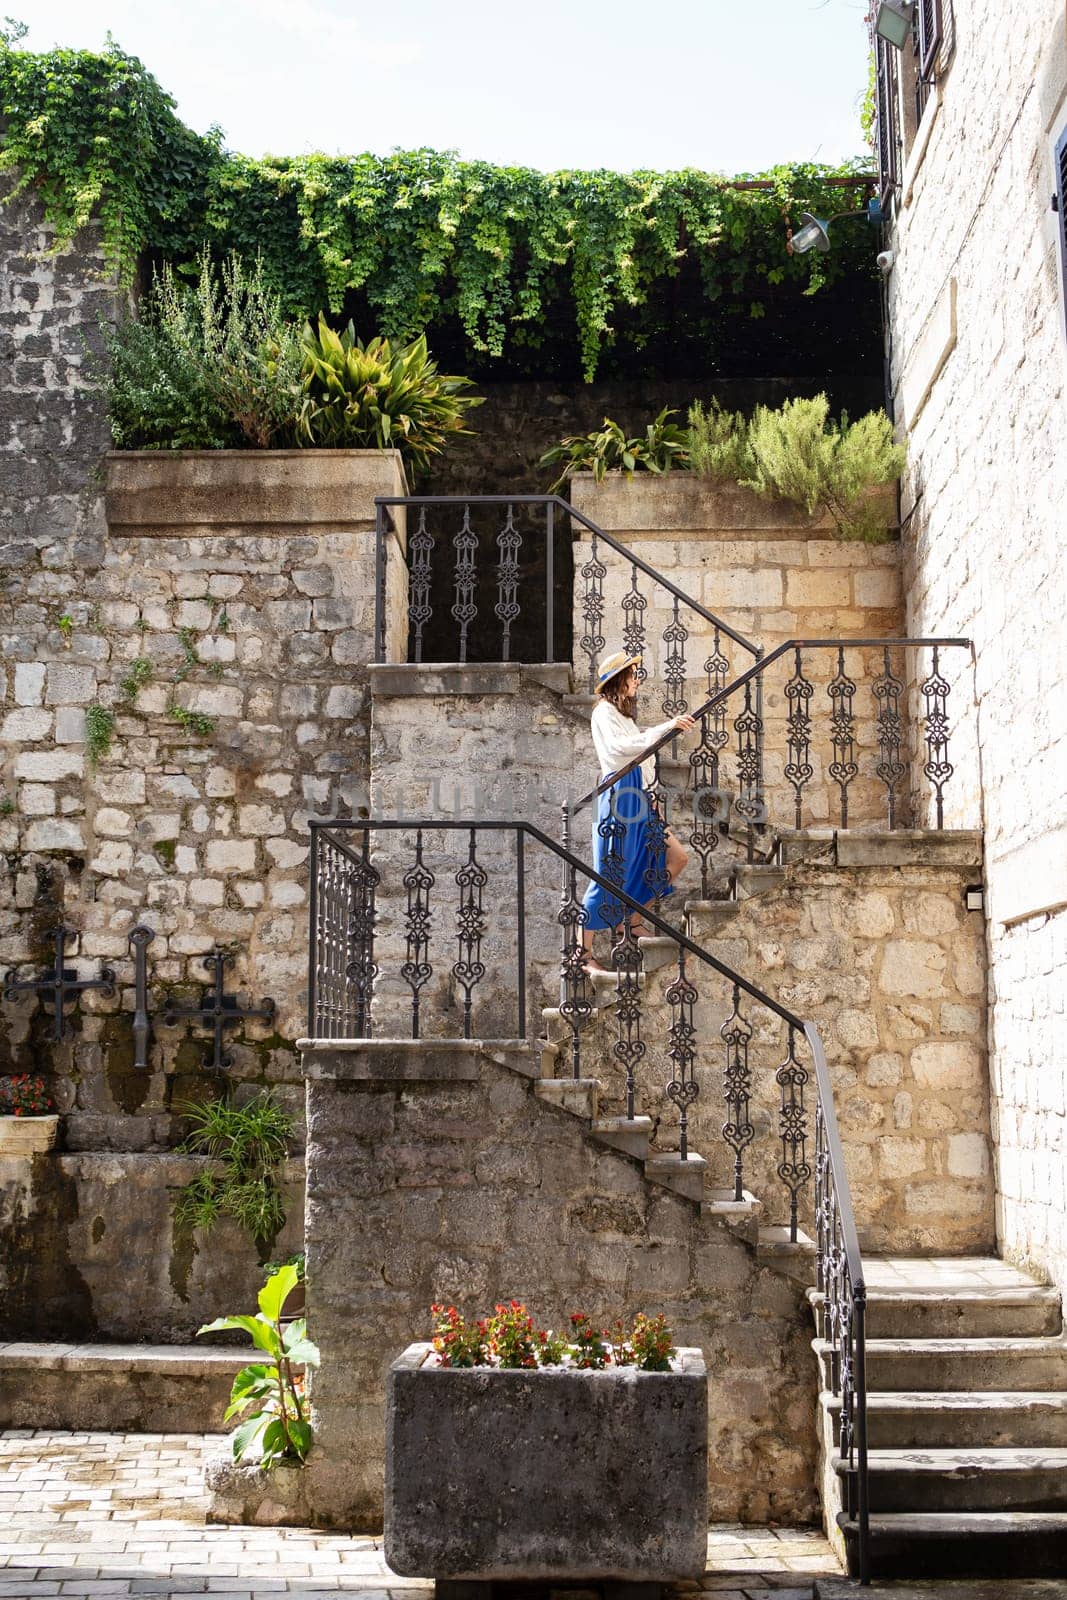 A girl in a blue dress and a straw hat walks the stairs in the old town of Kotor, Montenegro